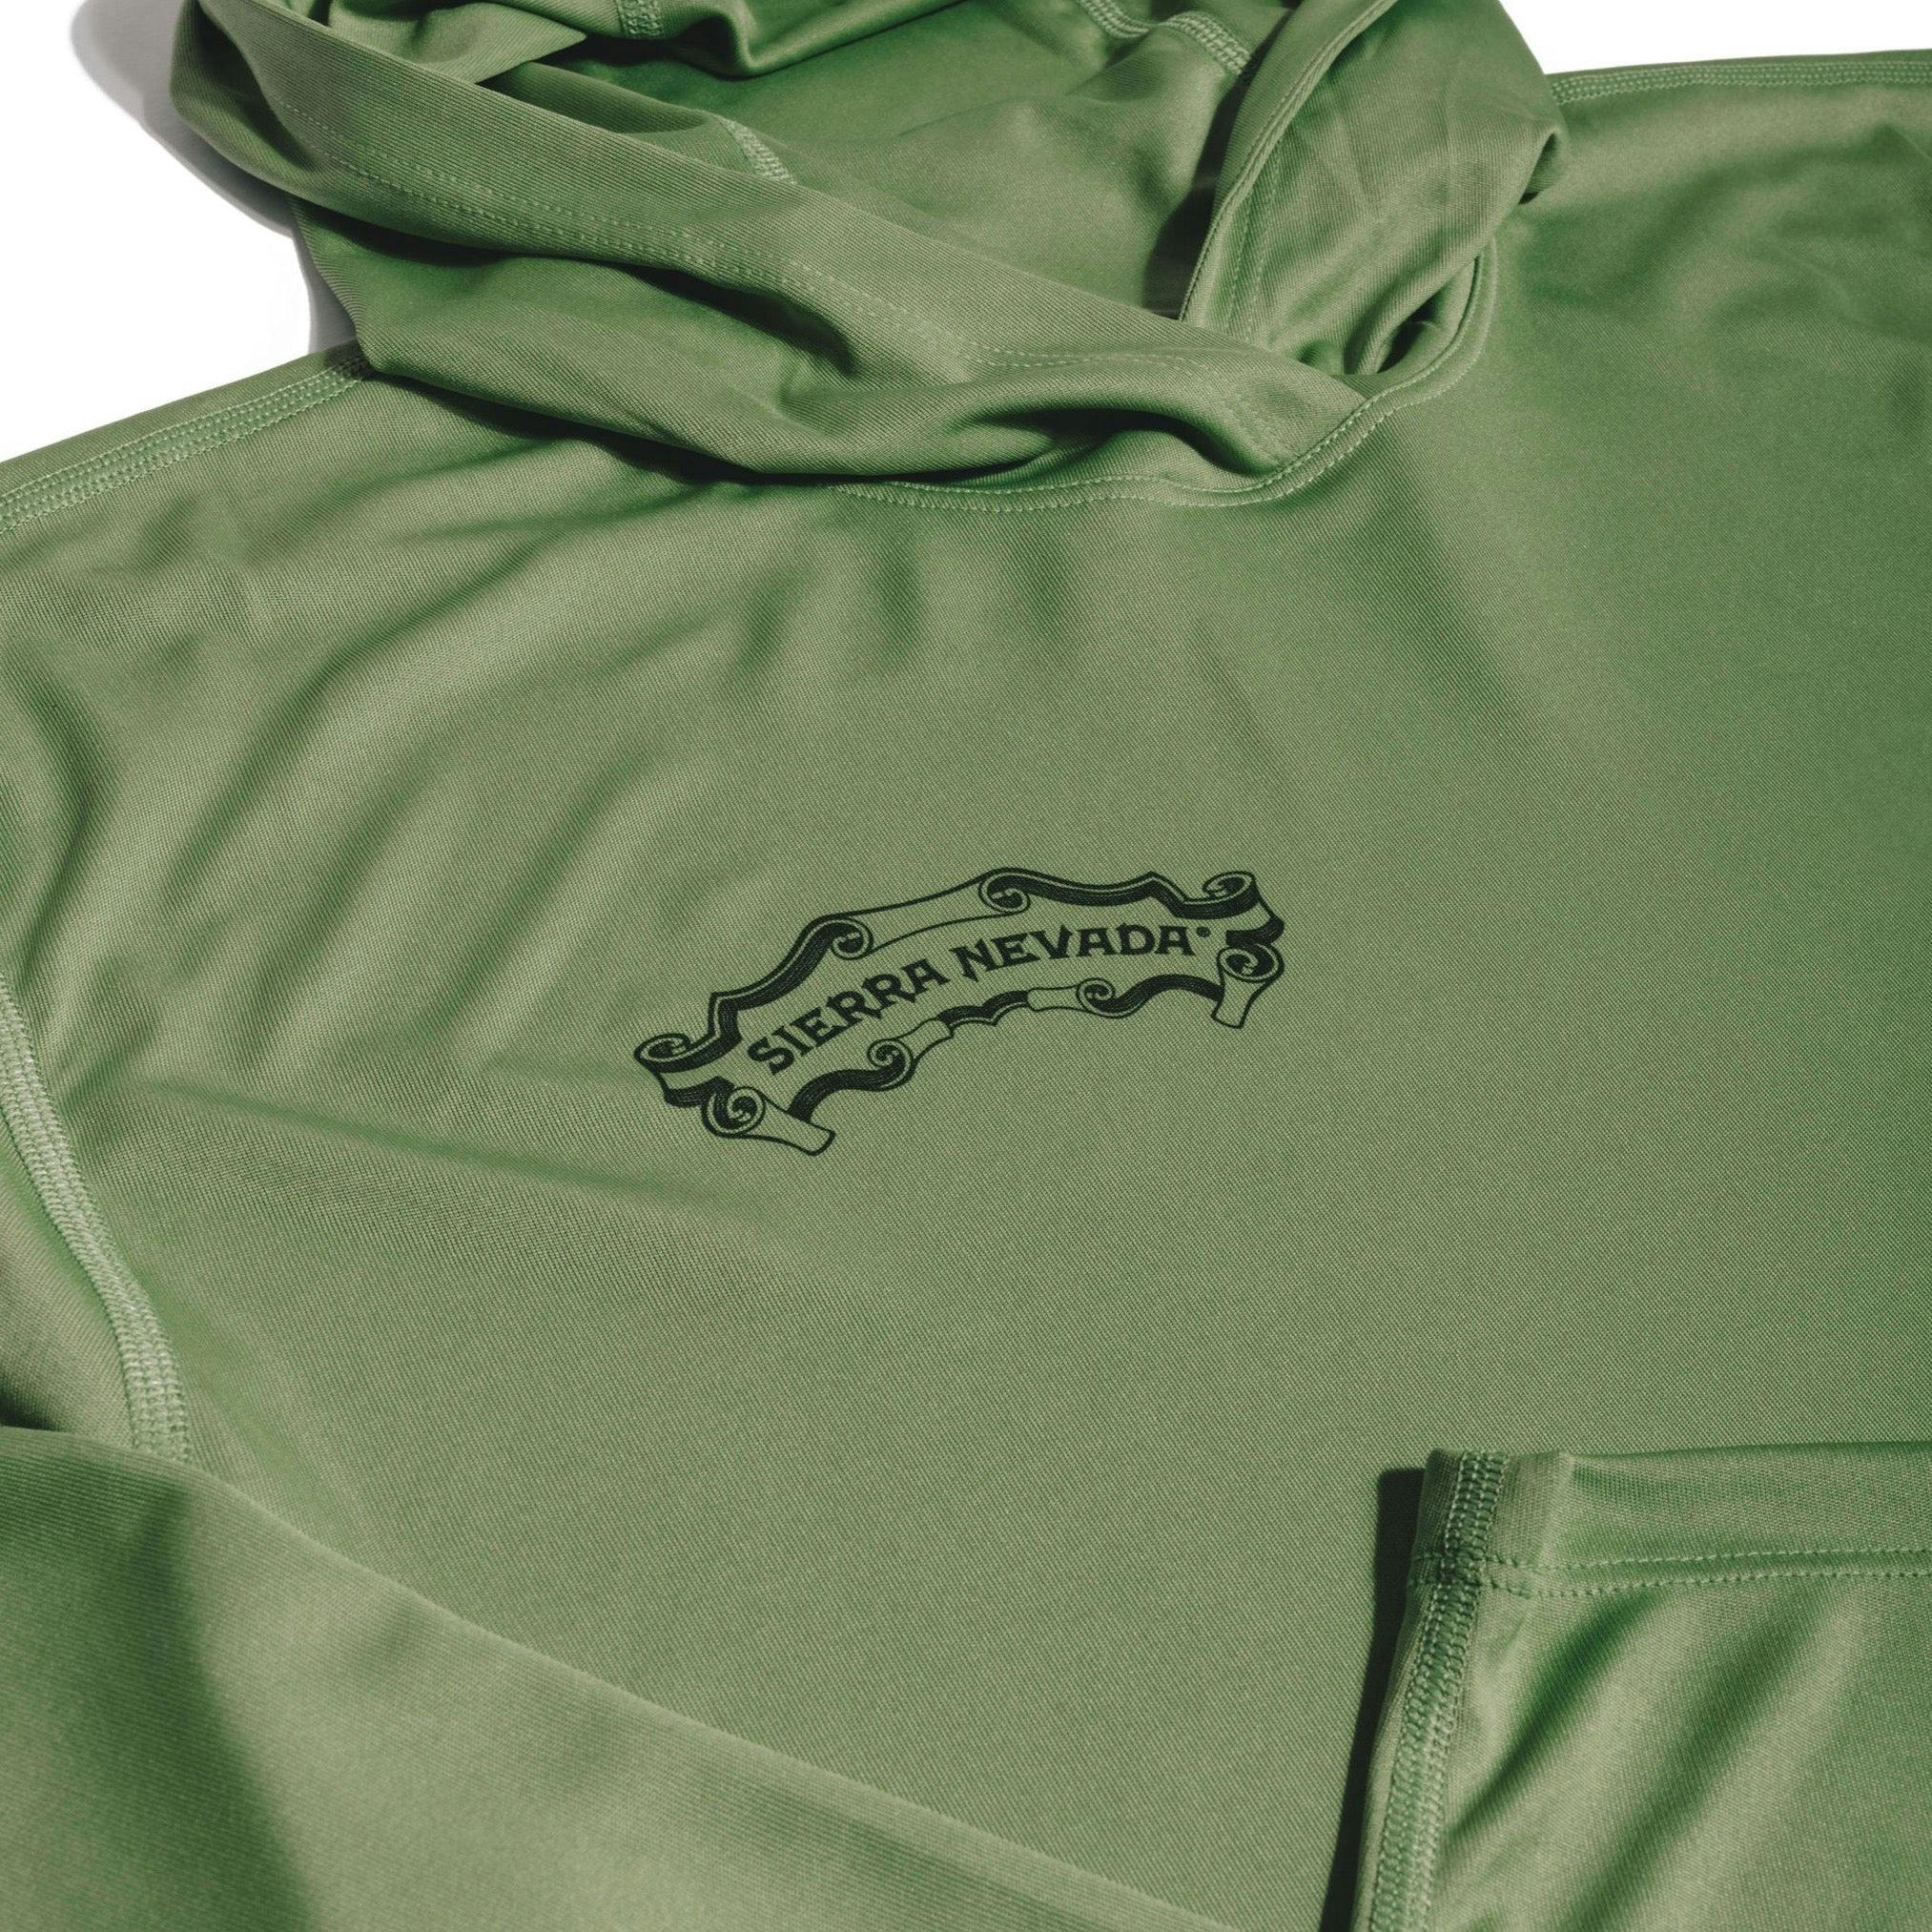 Sierra Nevada Simms Tech Hoodie - detailed view of scroll logo on front chest